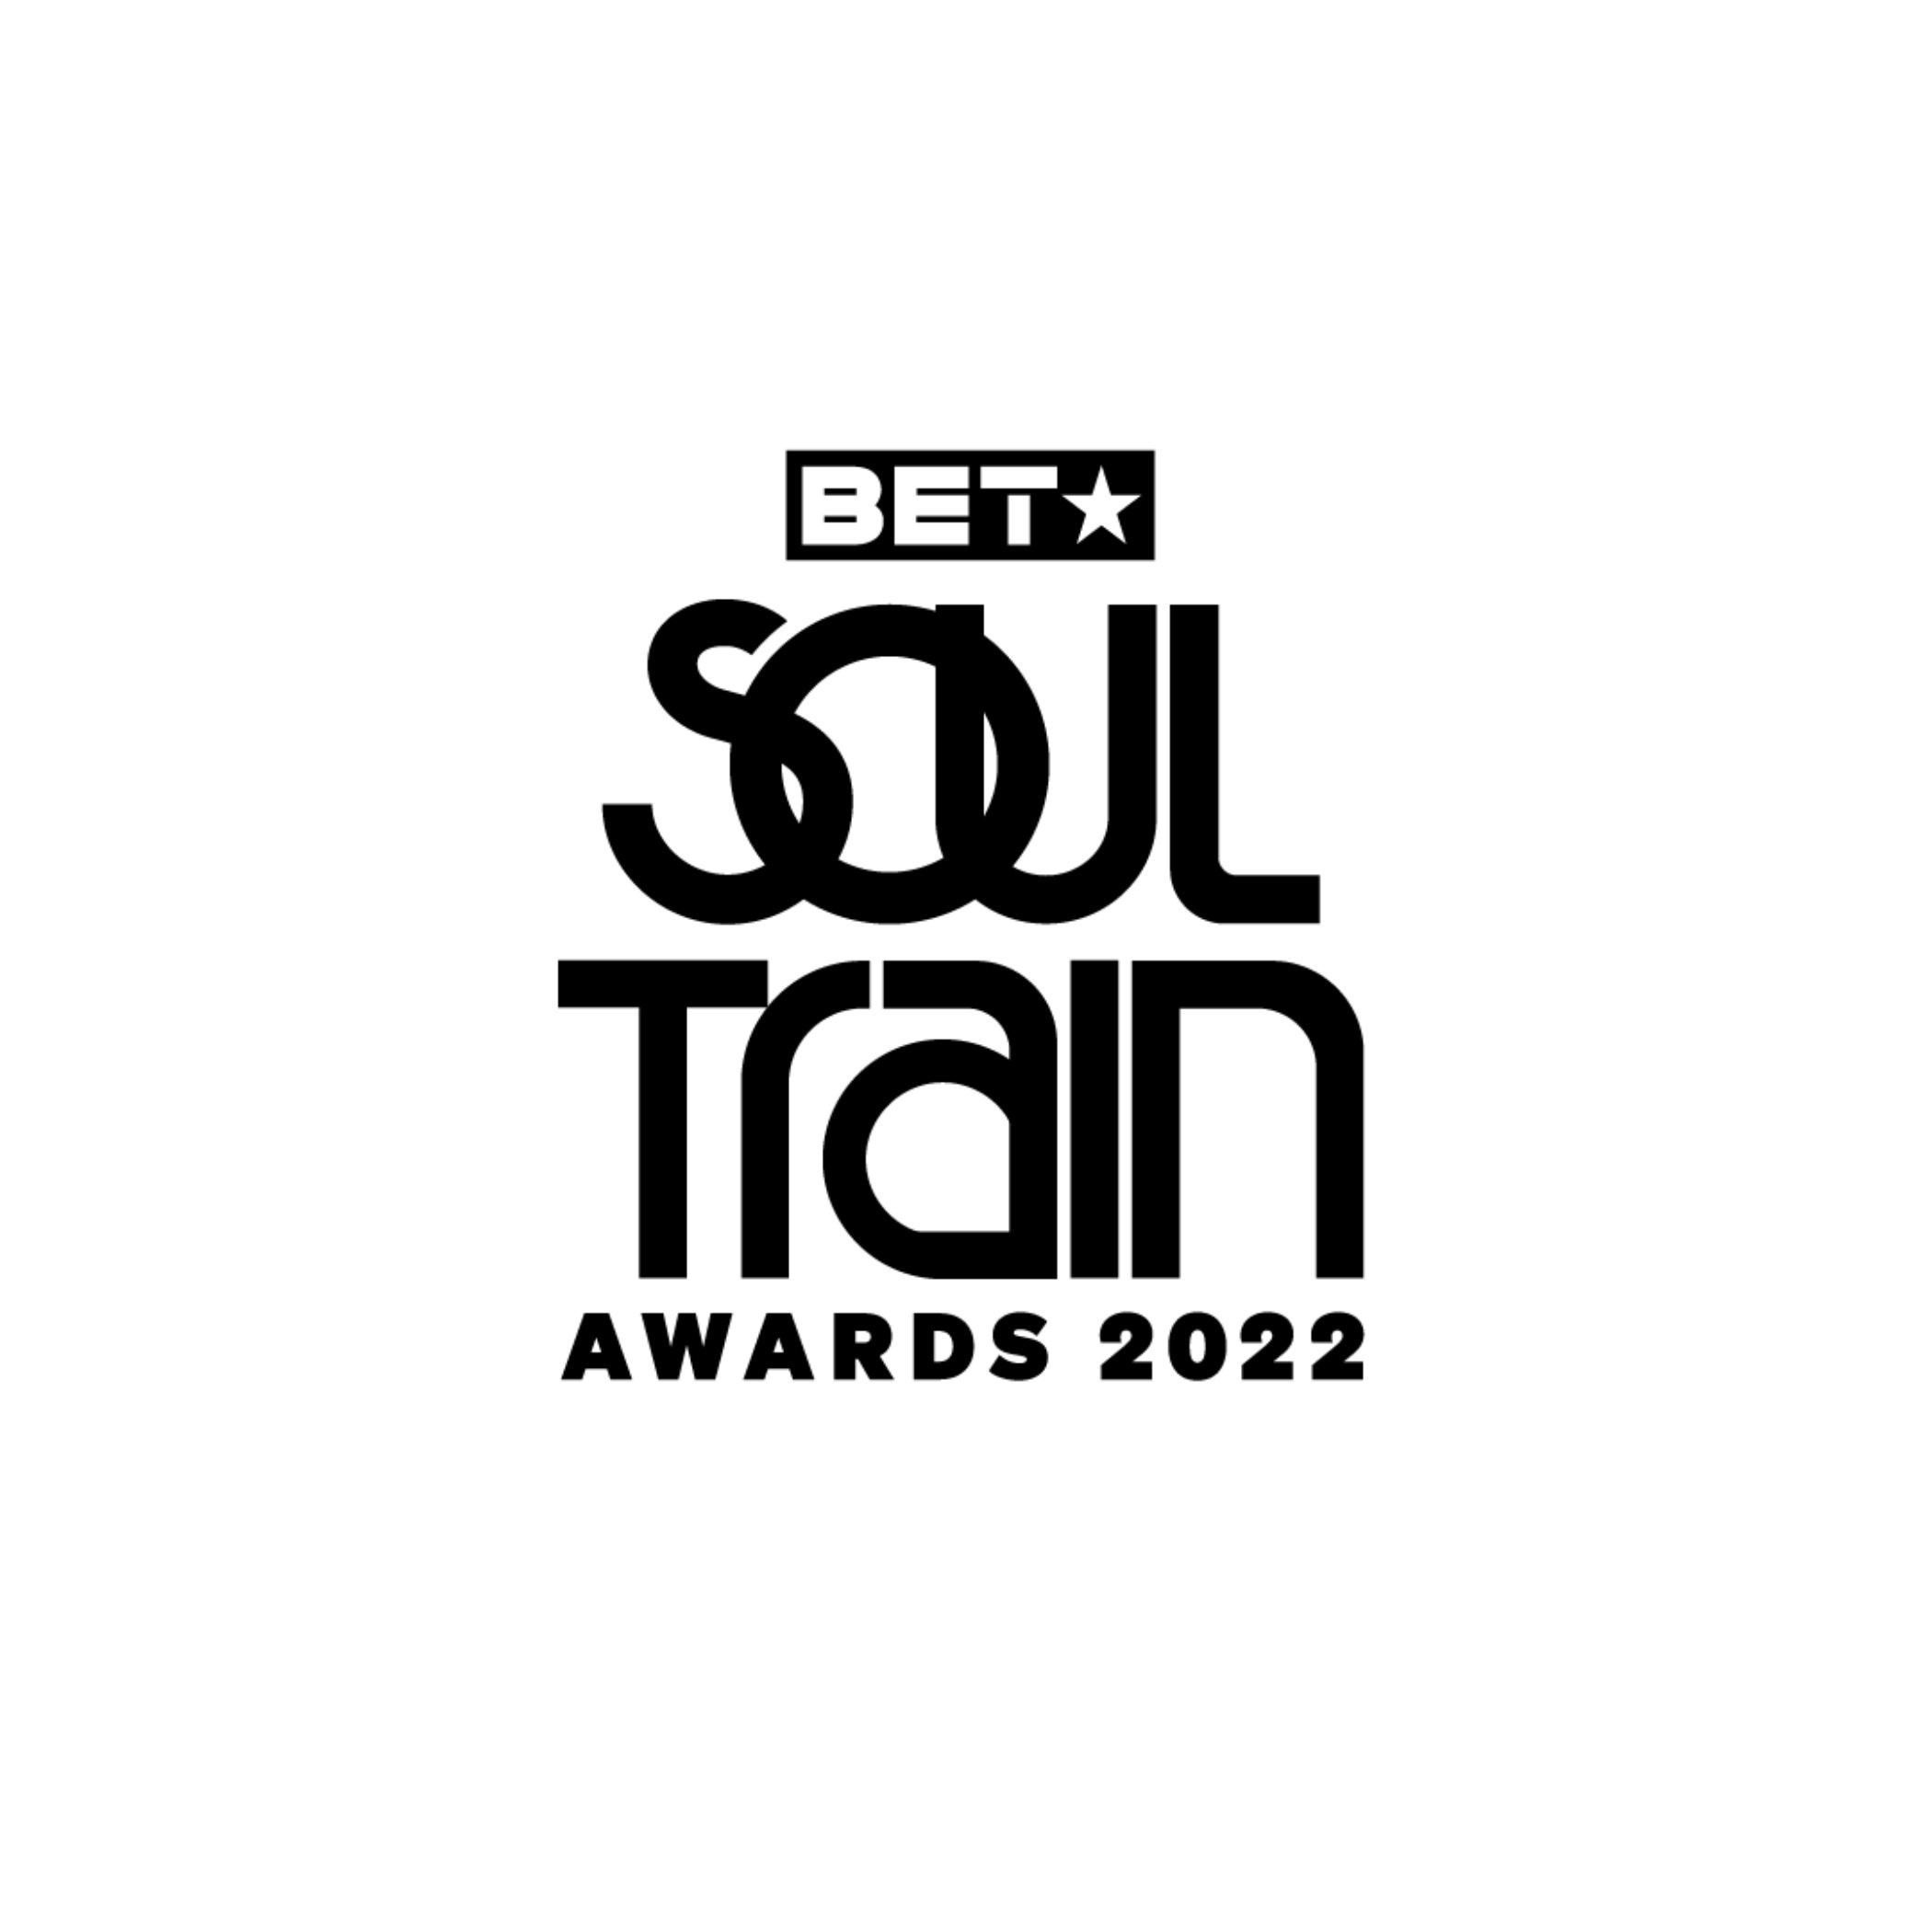 BET ANNOUNCES NEW AIR DATE FOR "SOUL TRAIN AWARDS" 2022, THE FEEL GOOD